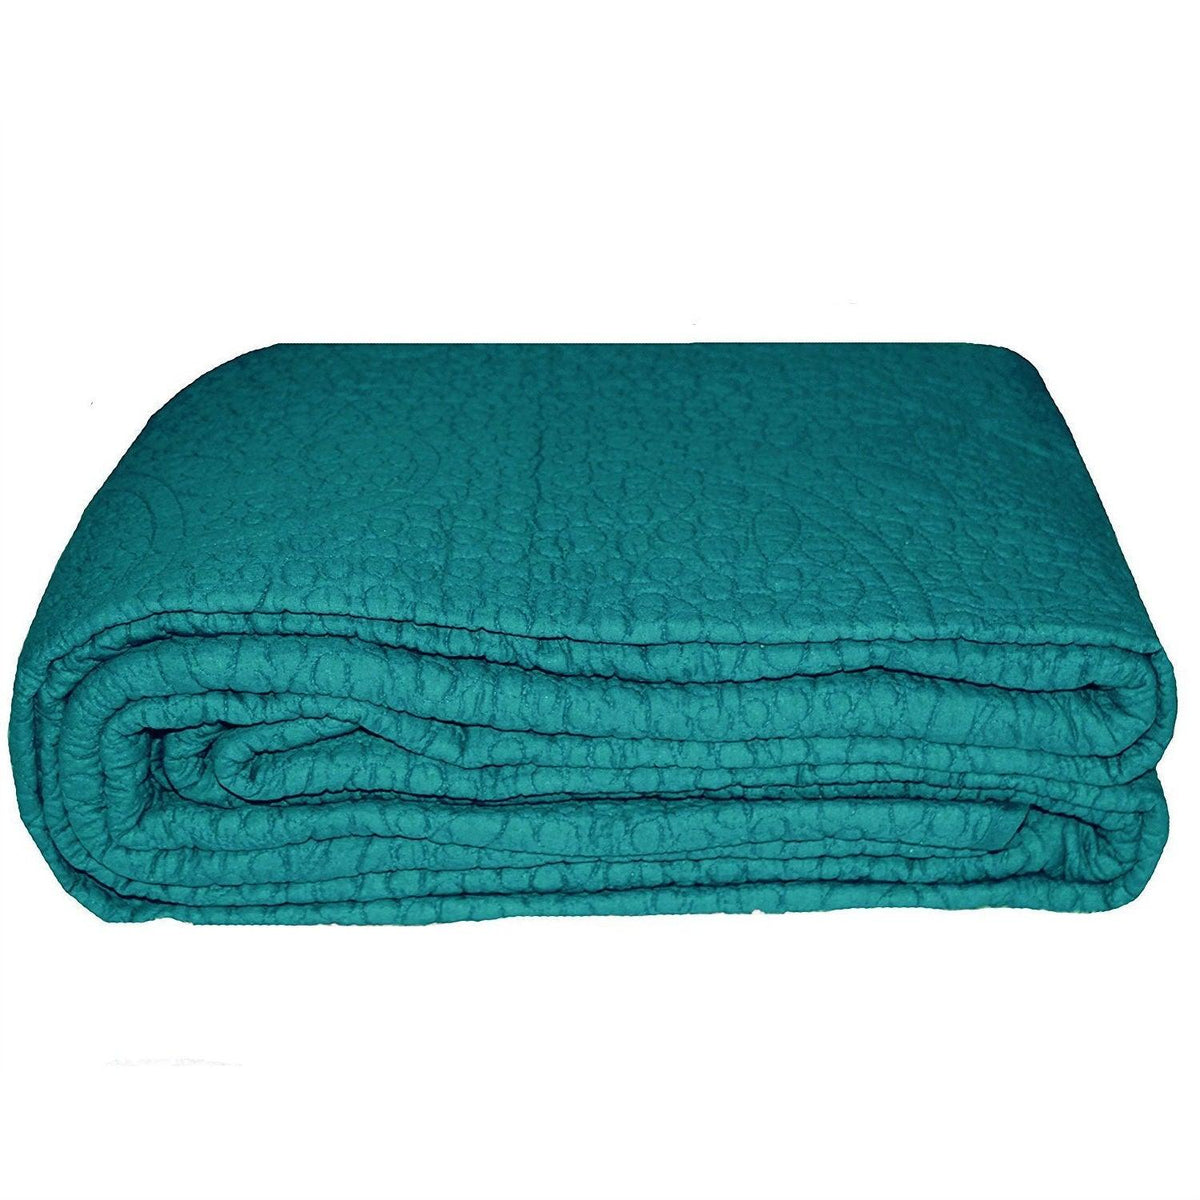 Full / Queen size 100% Cotton Quilted Bedspread in Turquoise - beddingbag.com